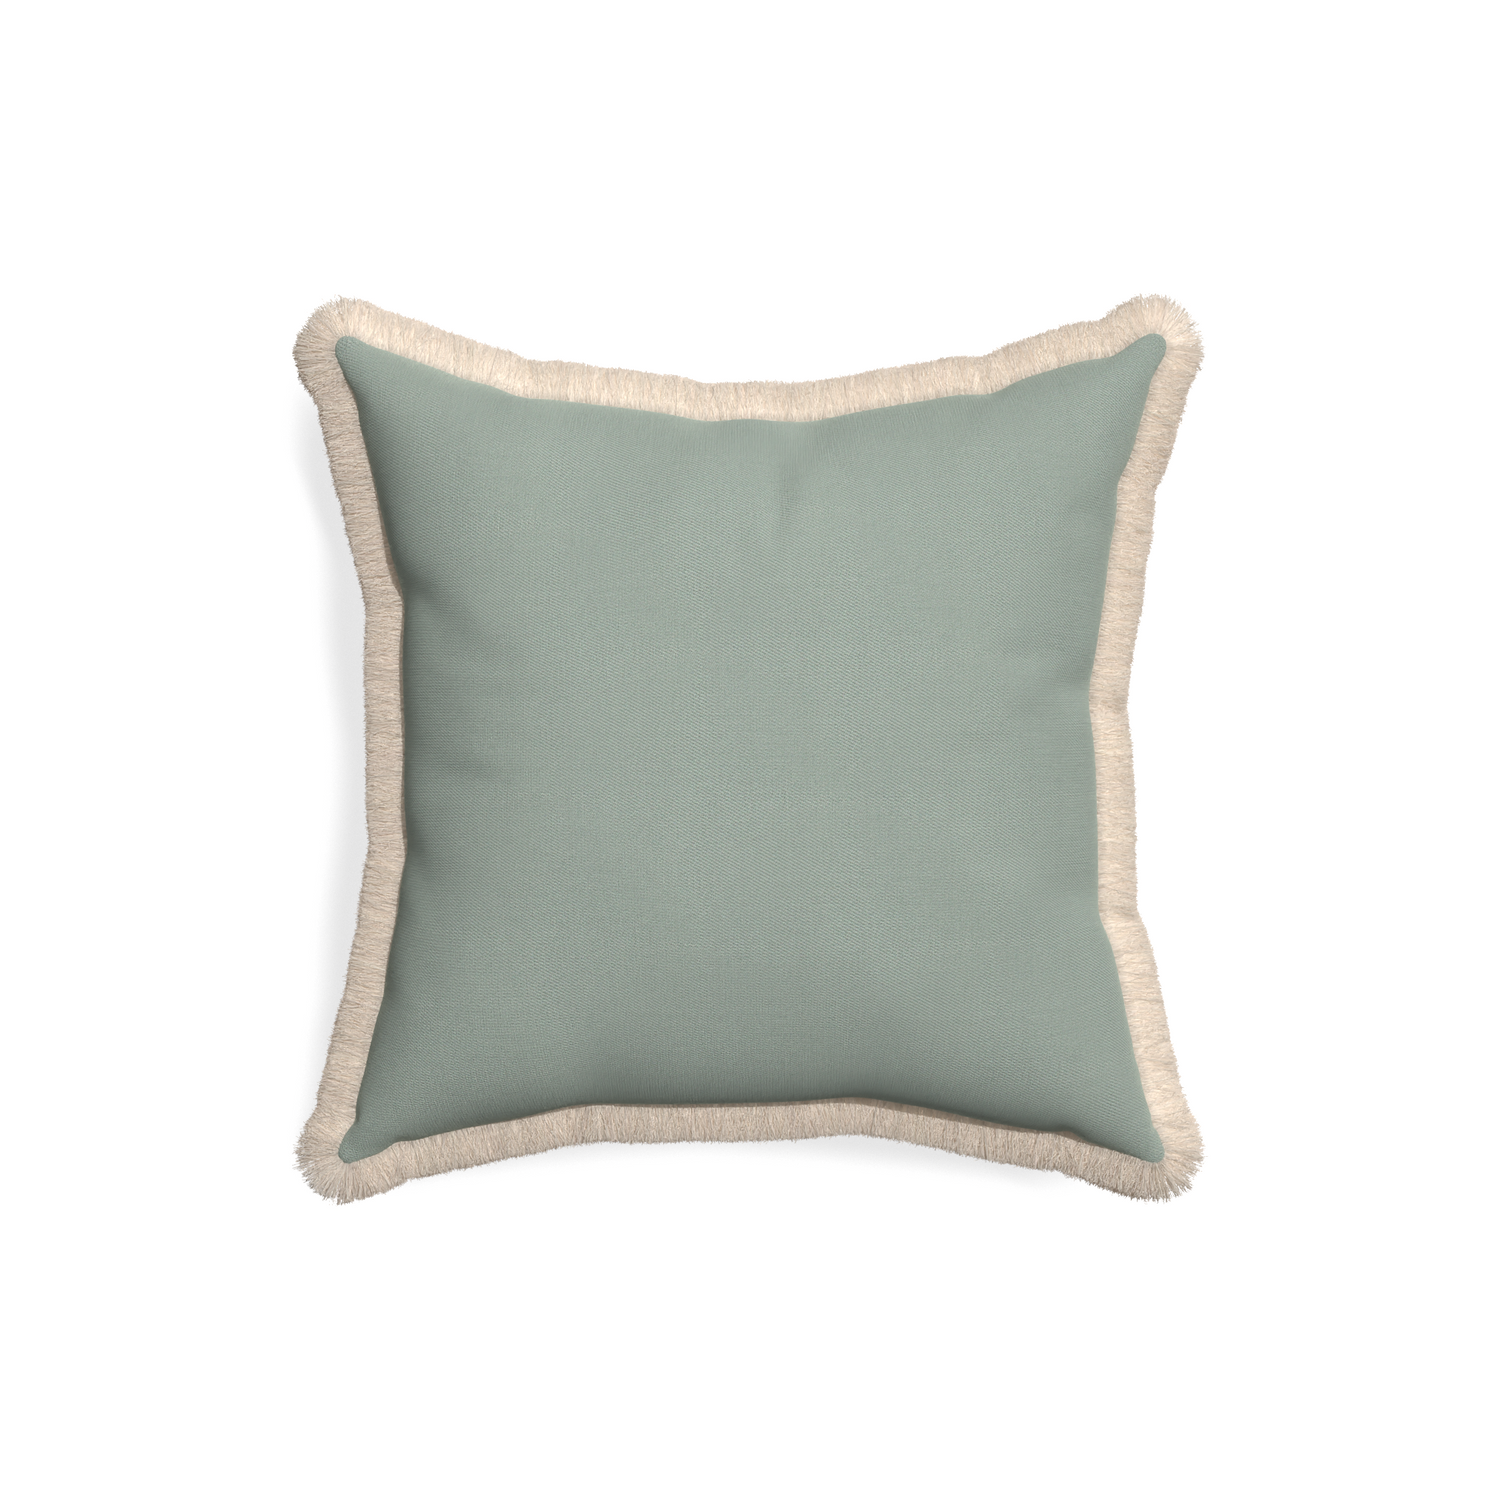 18-square sage custom sage green cottonpillow with cream fringe on white background